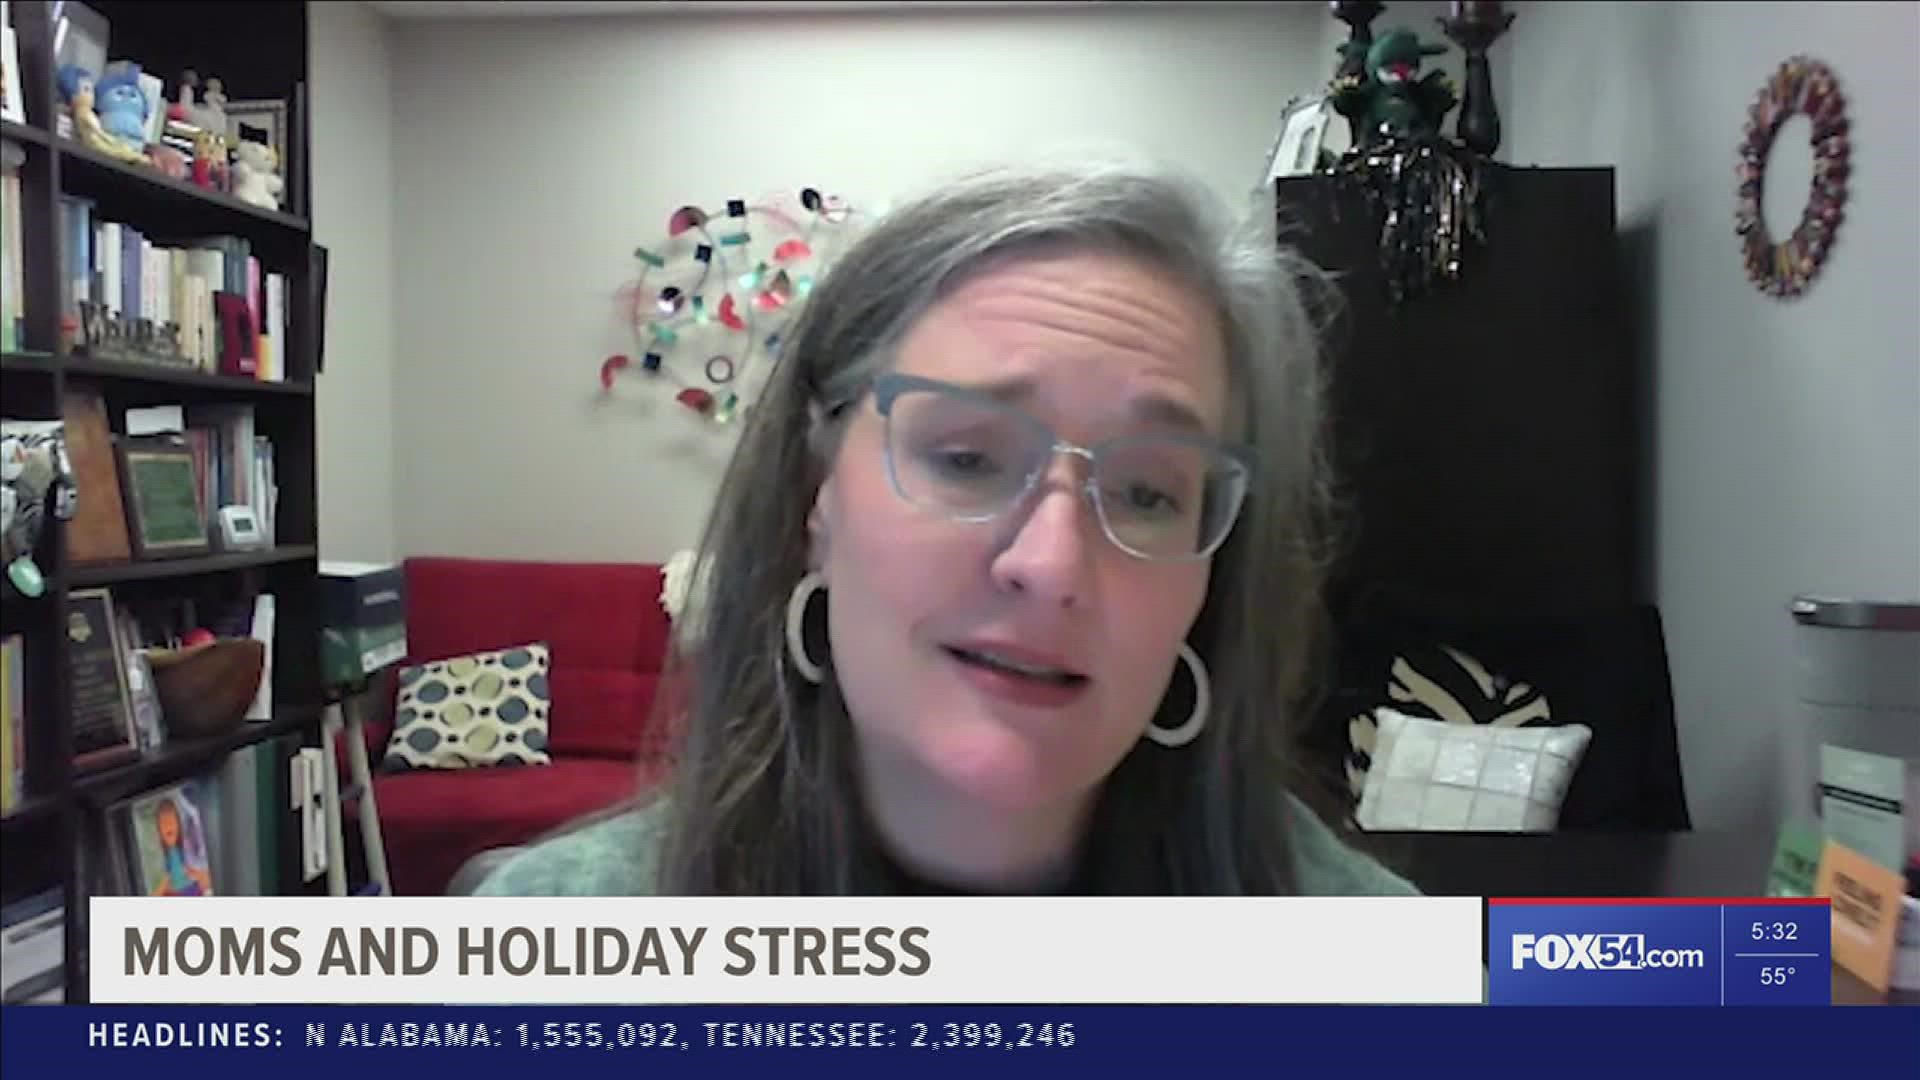 Holidays are stressful times and moms often bear the load of it. Here are some tips and advice on how to stay stress-free this holiday season.